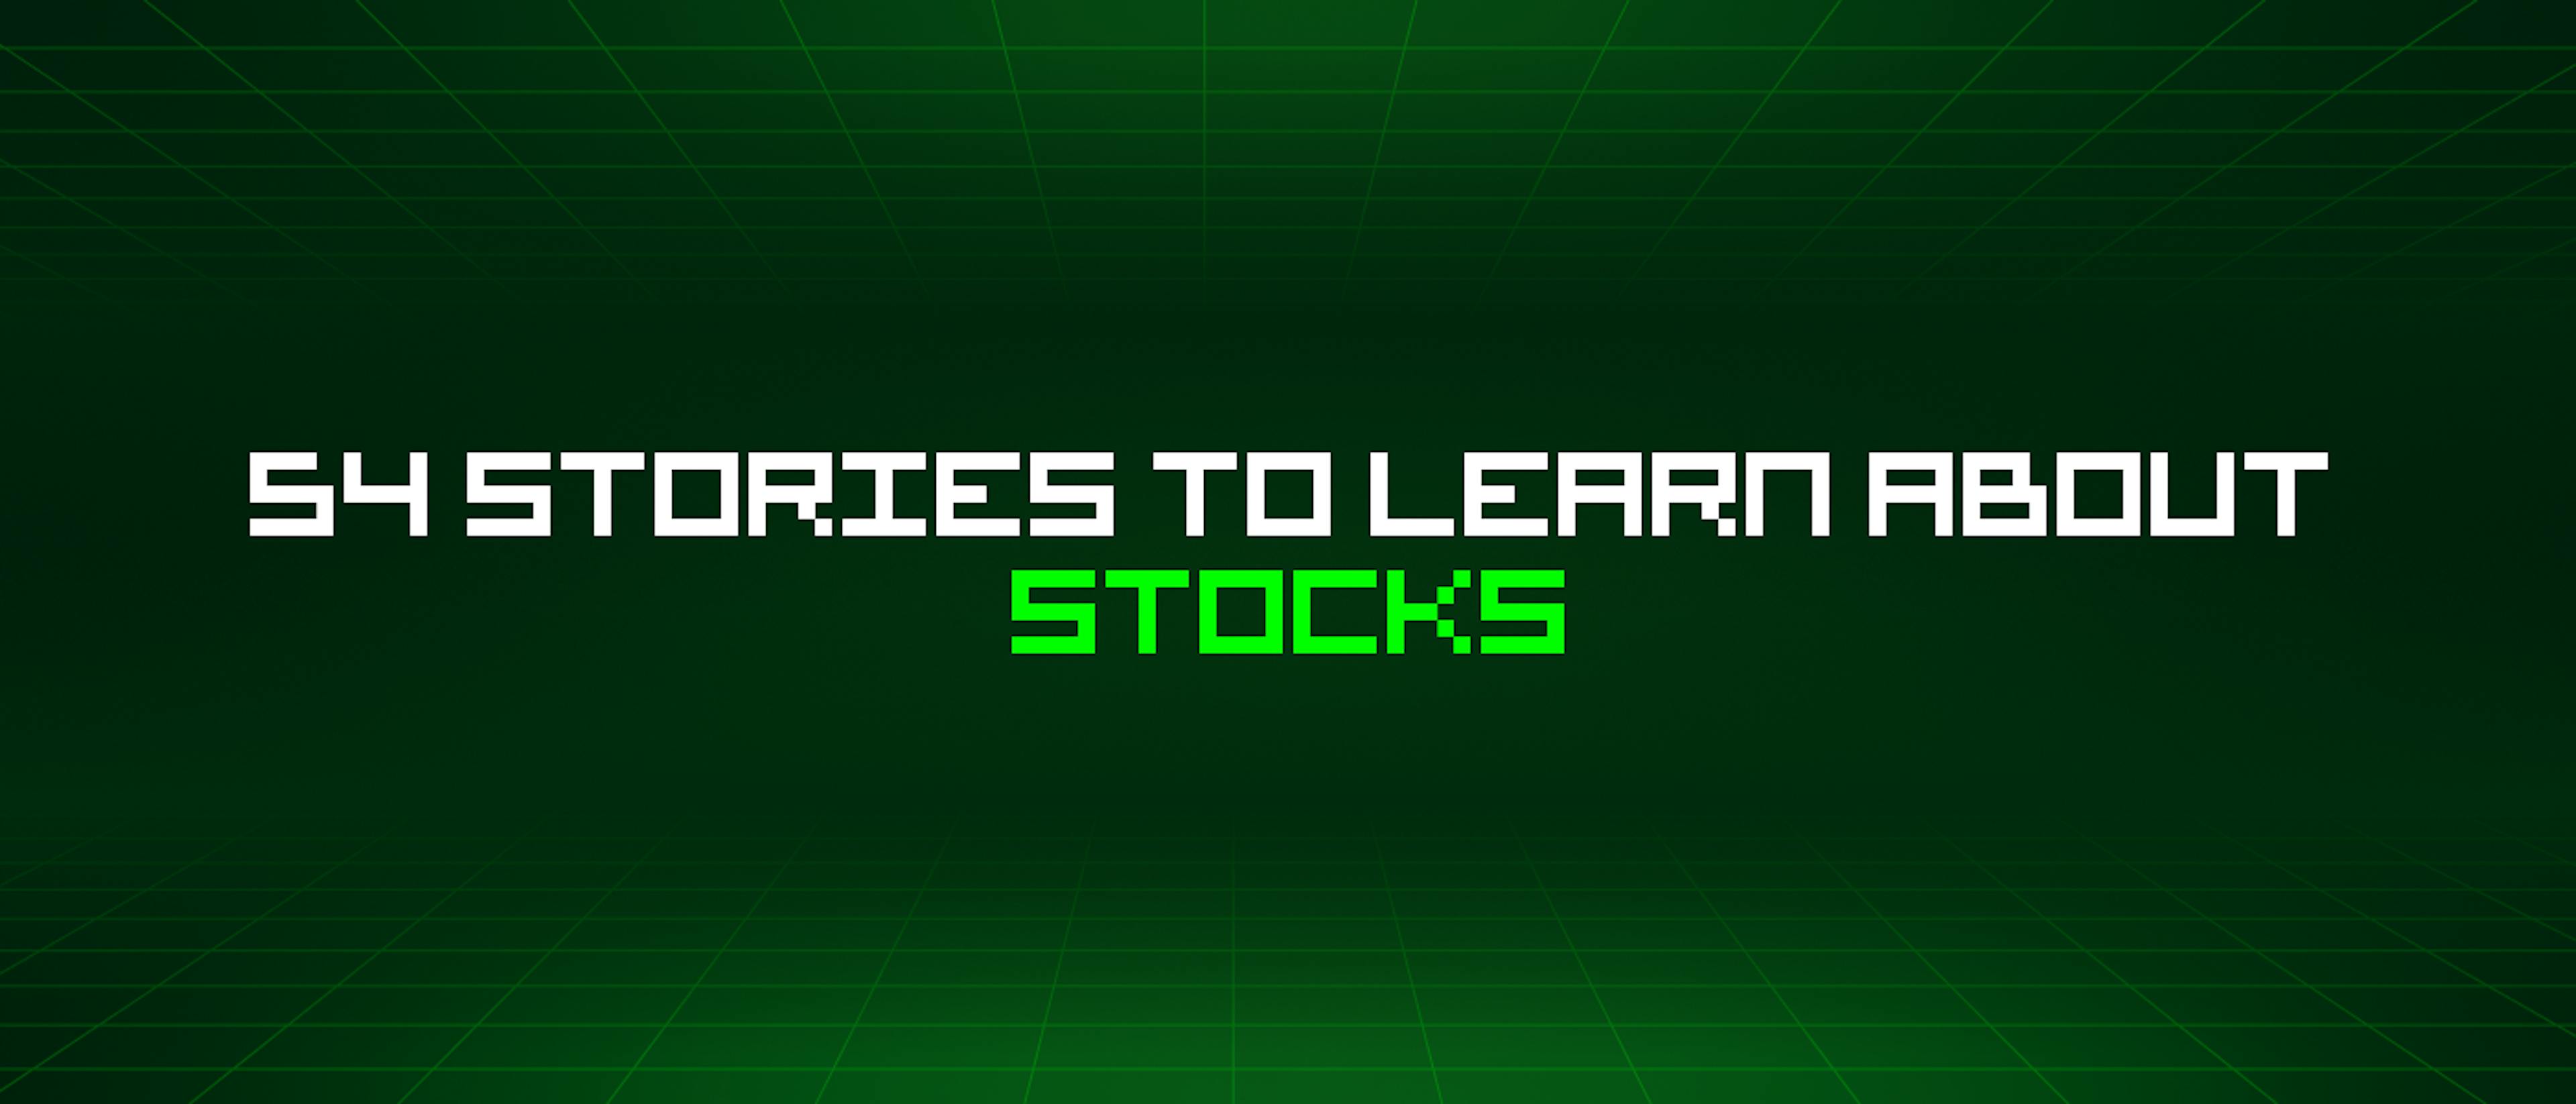 /54-stories-to-learn-about-stocks feature image